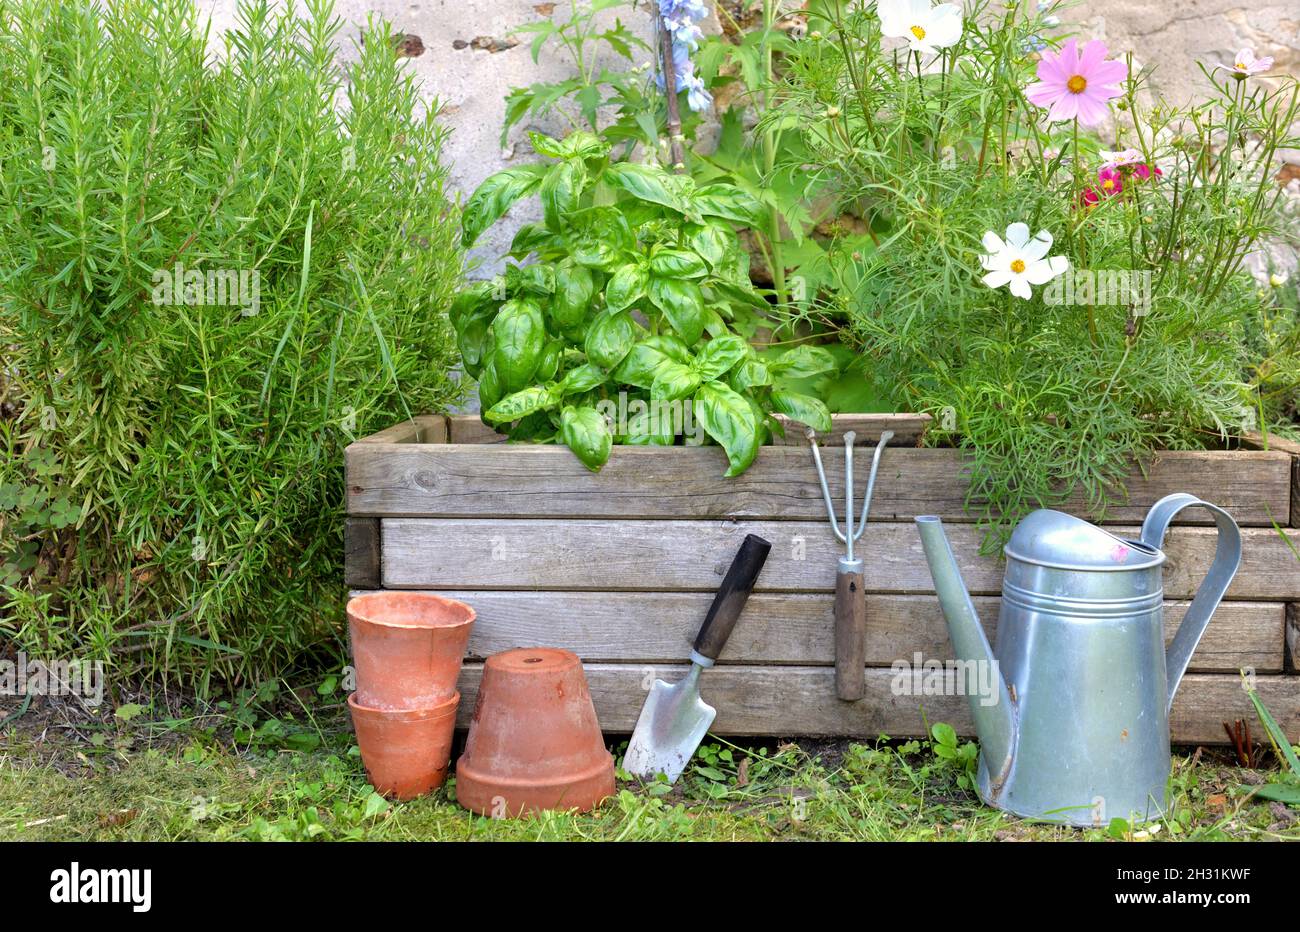 aromatic plant and and flowers in a wooden gardener with gardening tools Stock Photo